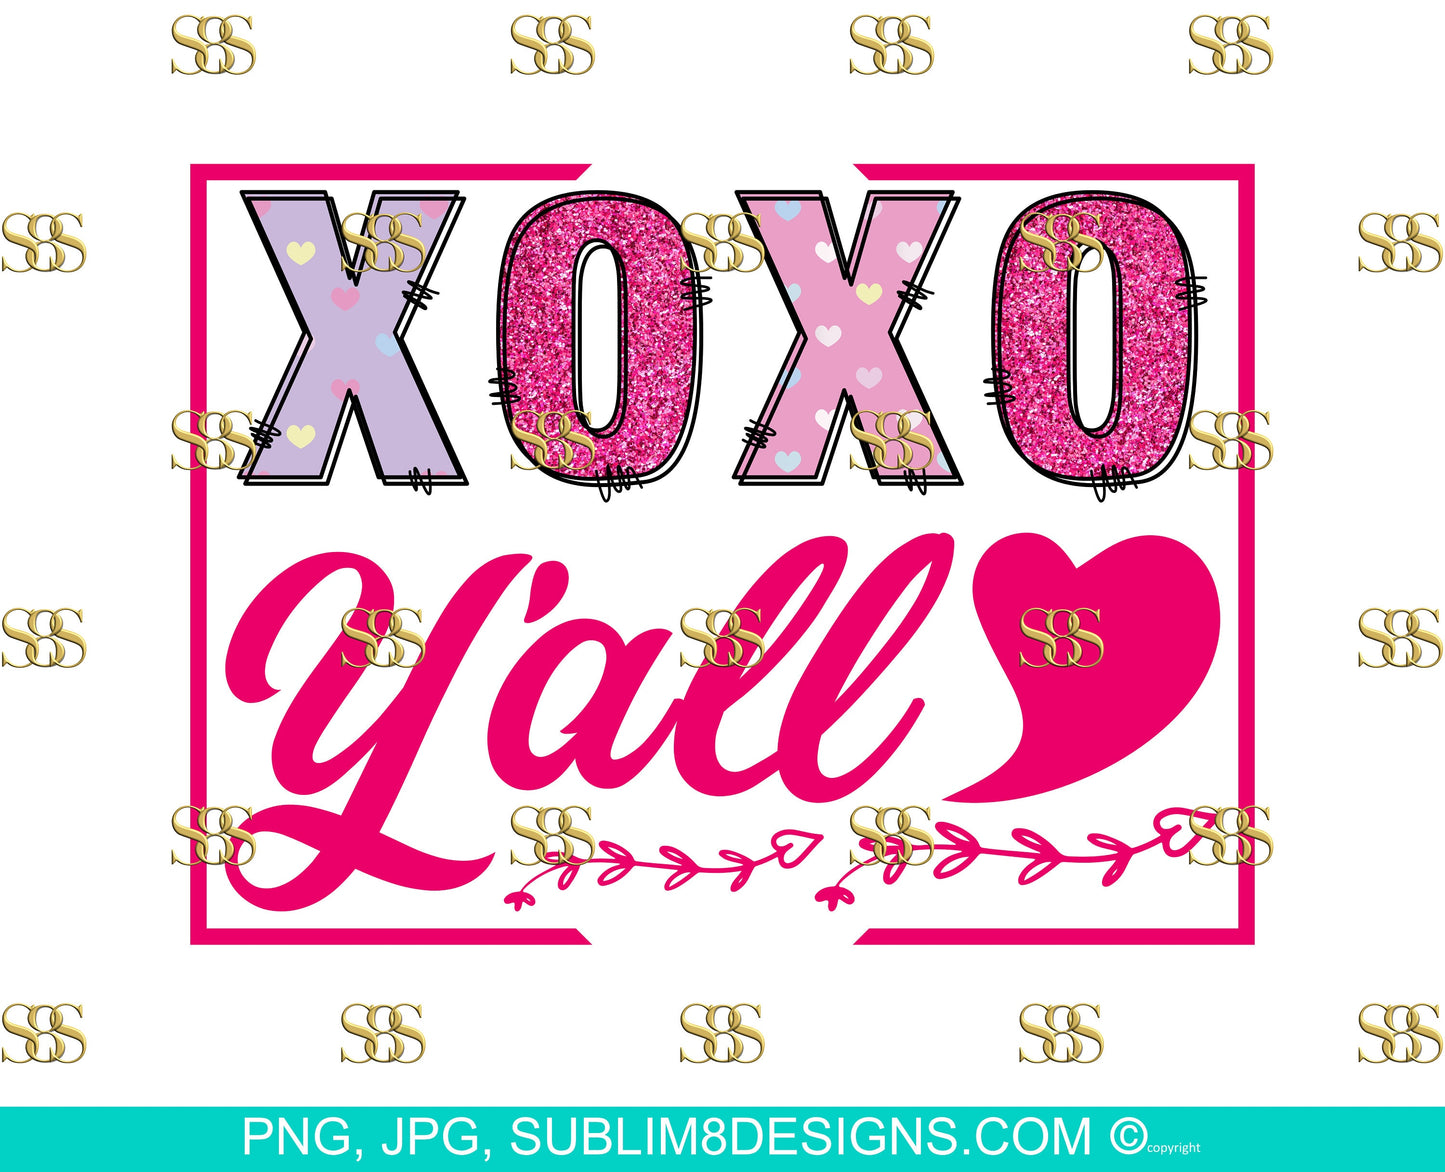 XOXO Y'all | Pink Design | Pink Heart | xoxo | Y'all Design | Pink Glitter | Purple Heart | Pink Heart | Sublimation Design PNG and JPG Only